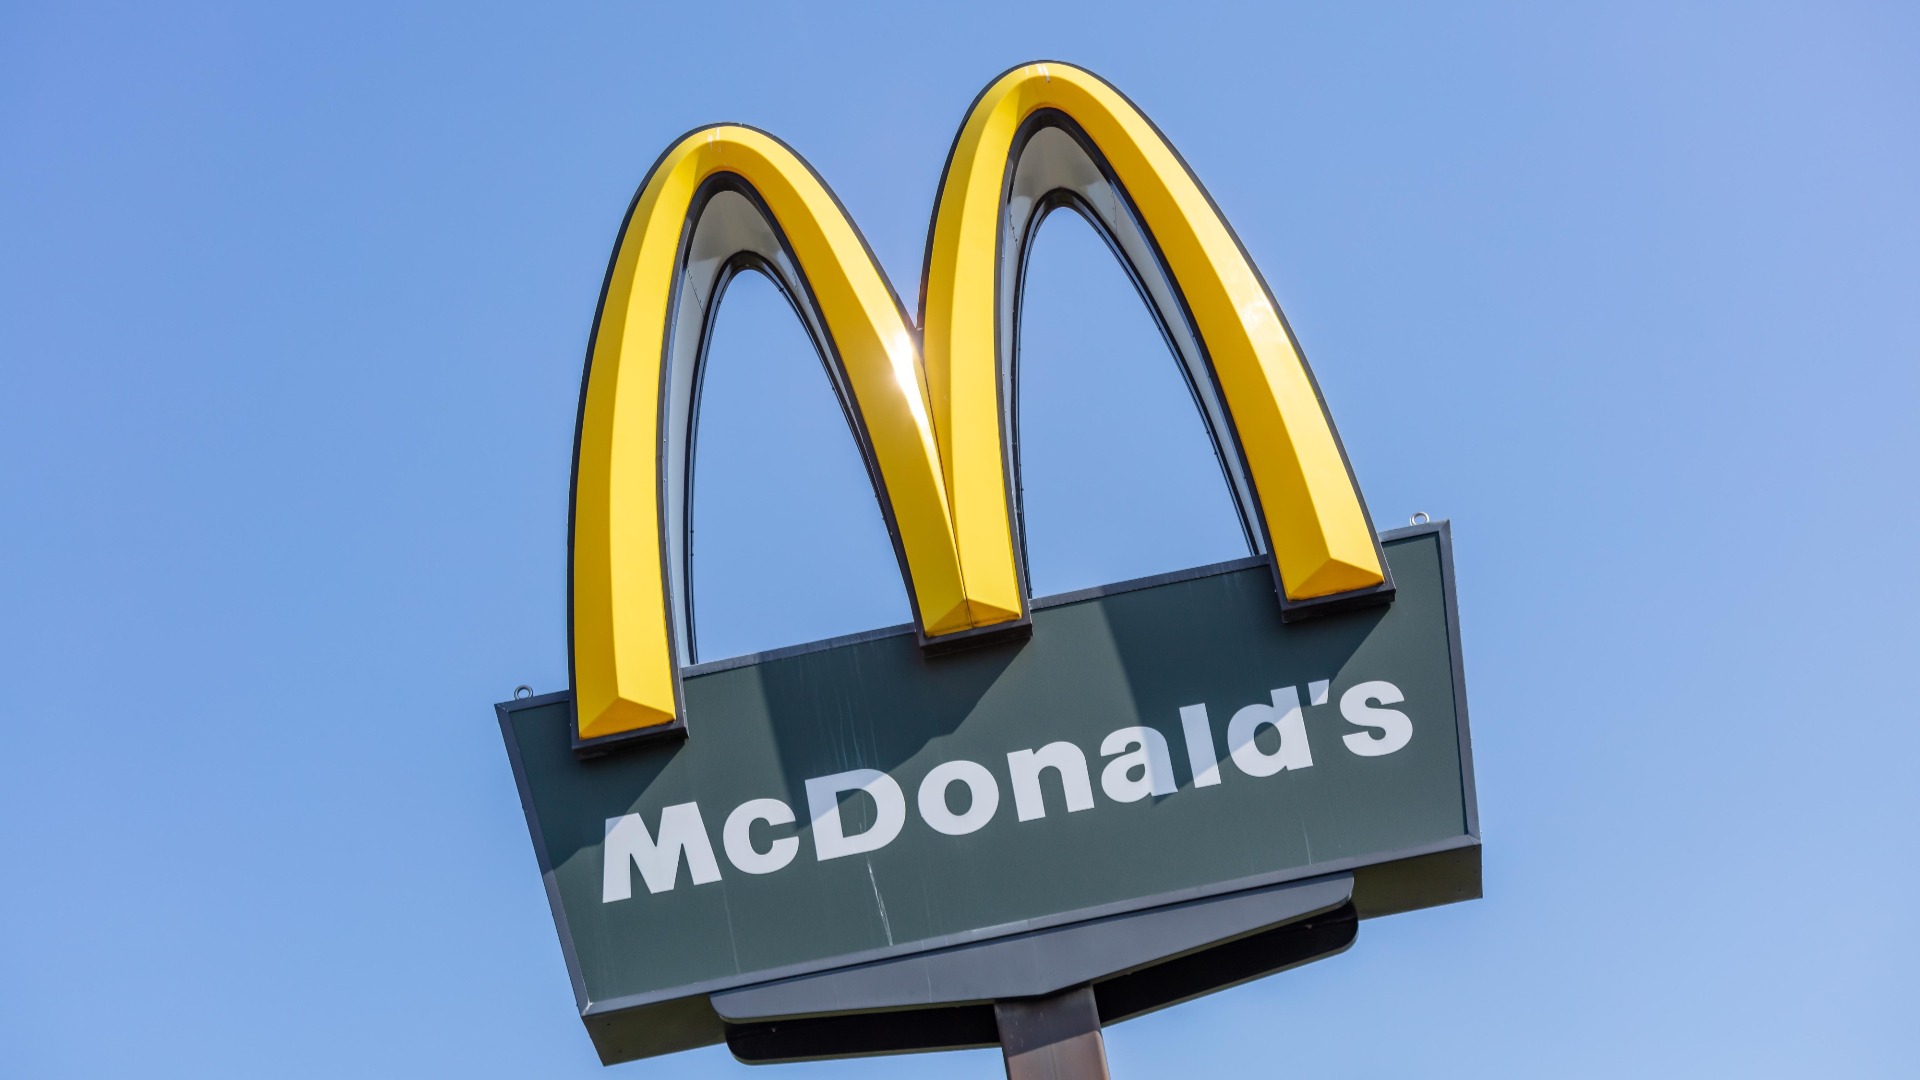 McDonalds Lawsuit Accuses Fired CEO of Hiding Evidence About Sexual Relationships With Employees Complex image pic picture